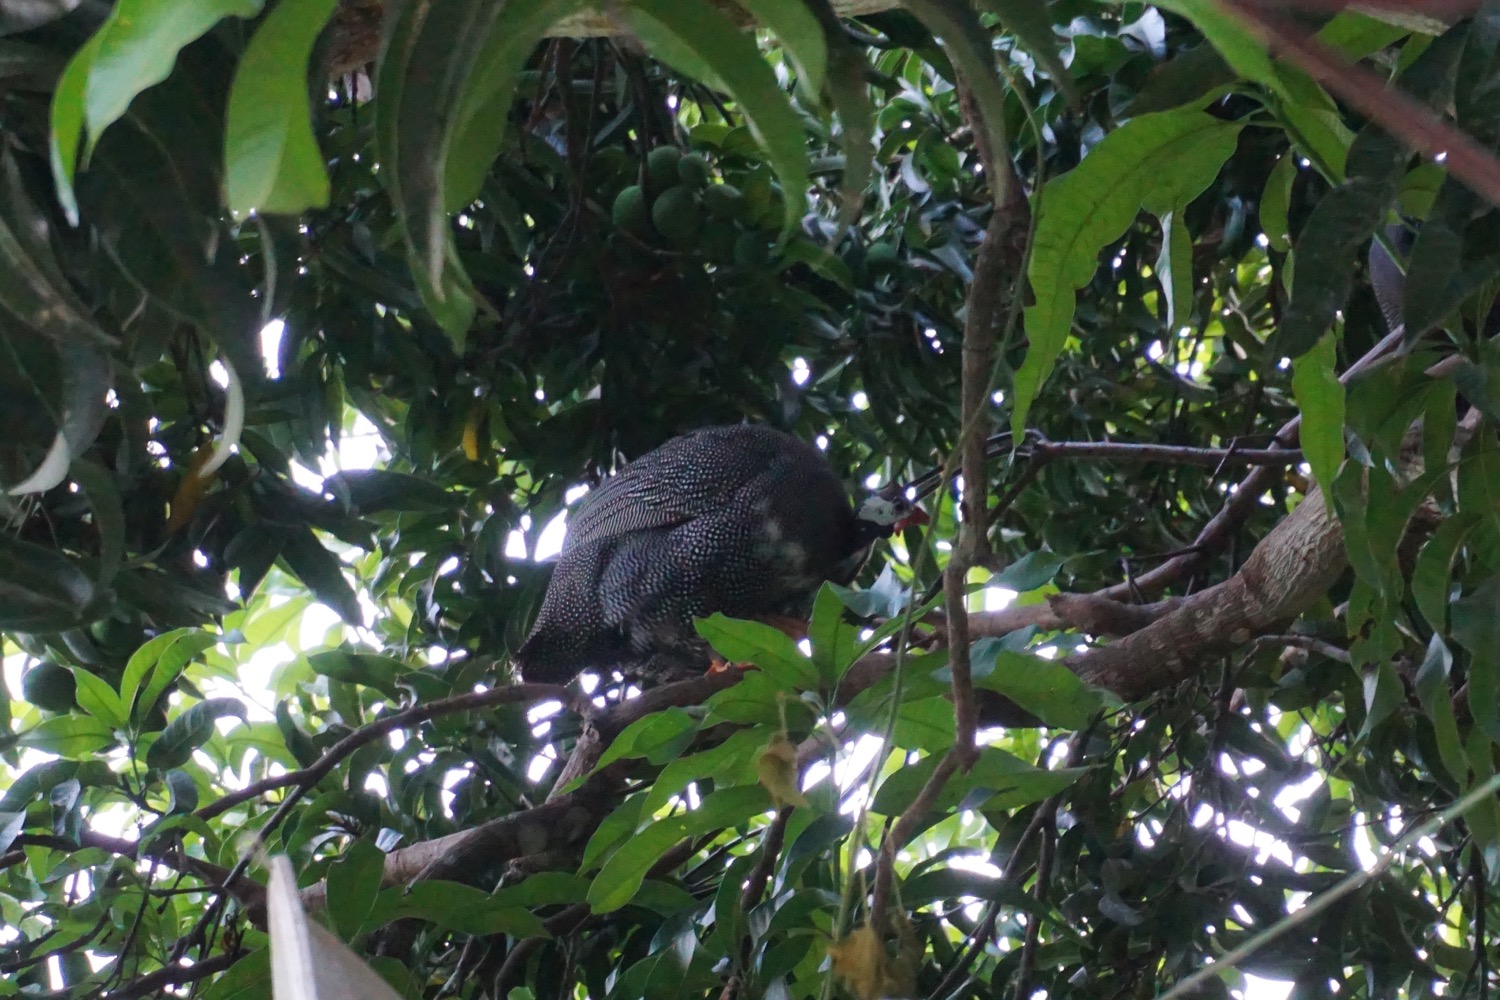 A large bird in the jungle canopy